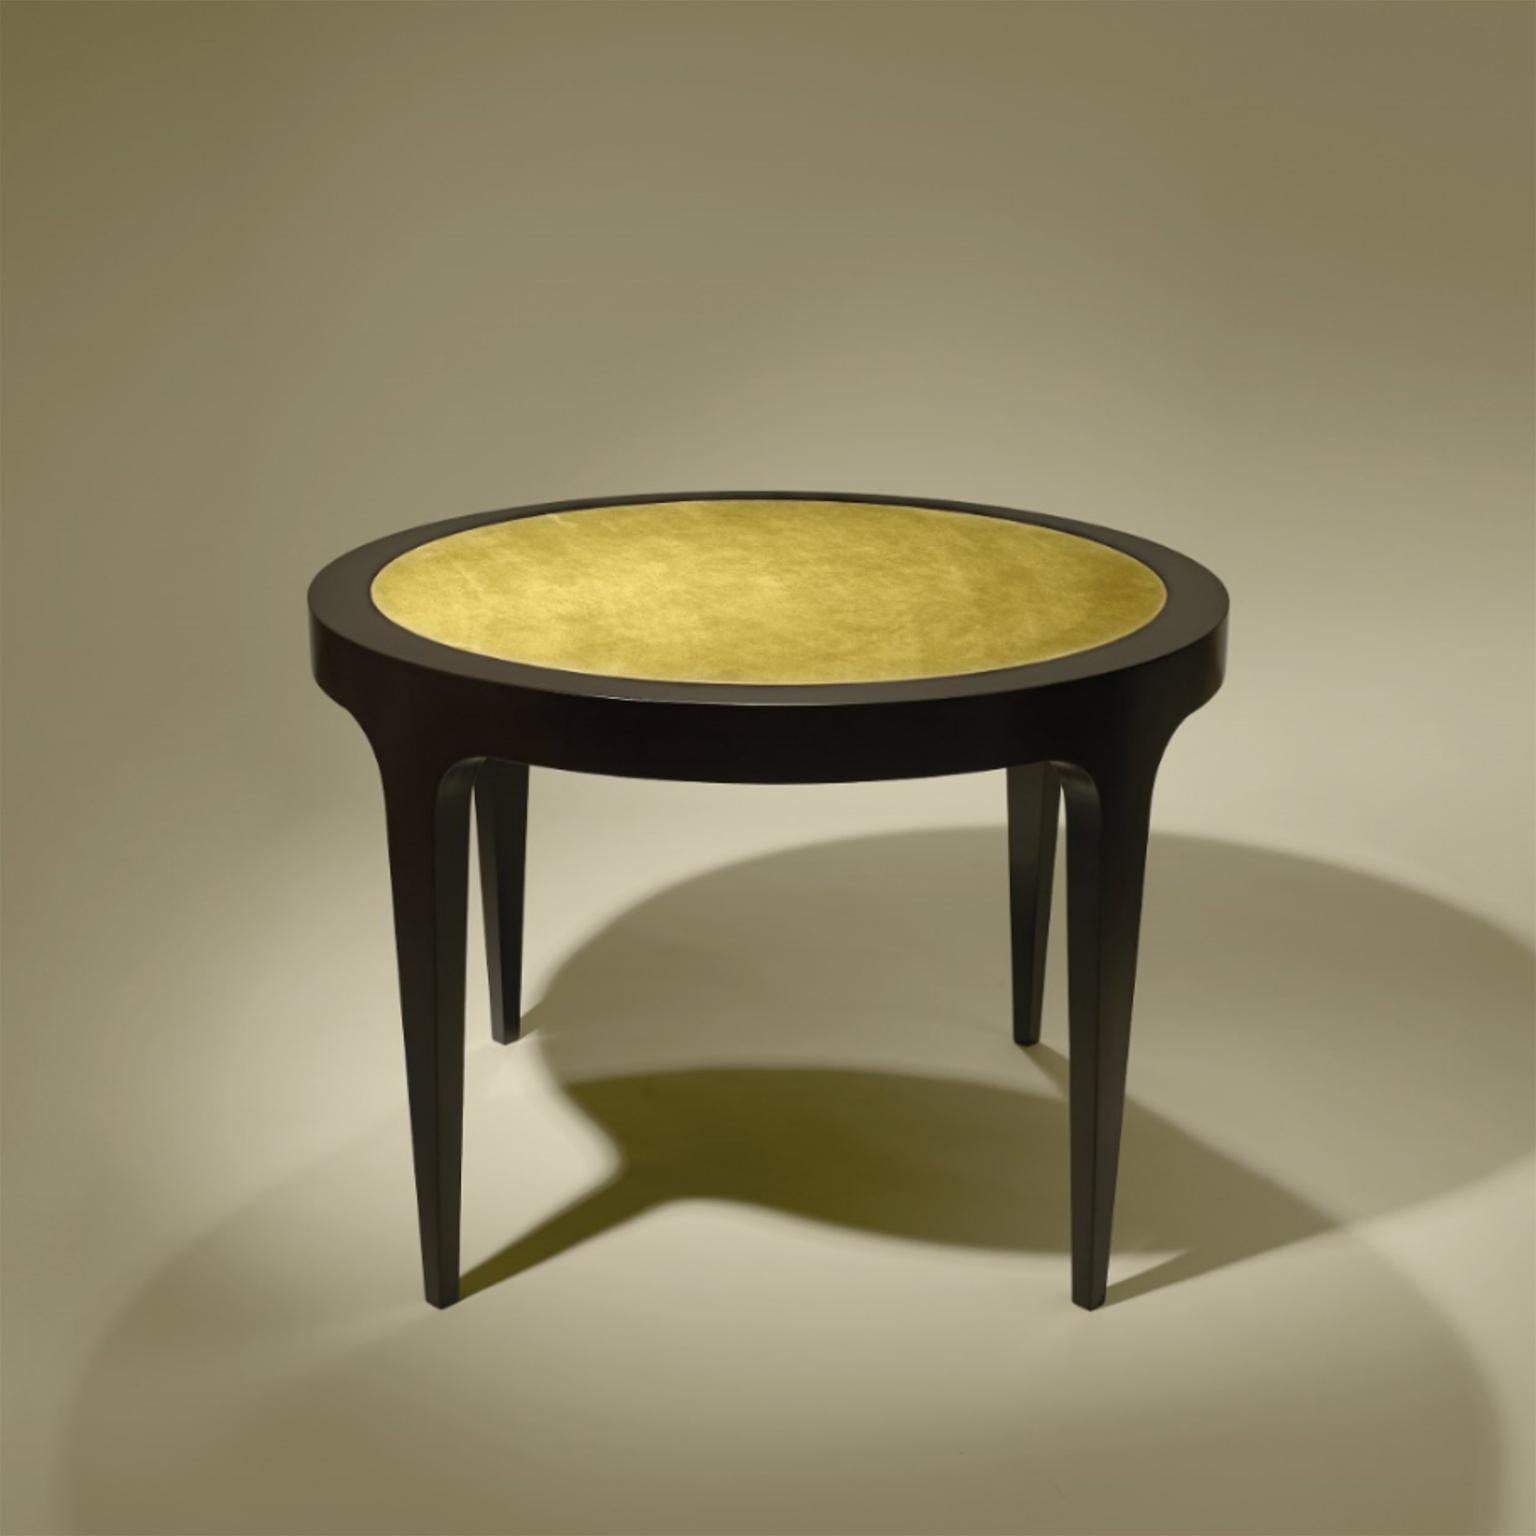 Circle Game table in dark oak and top with fabric.
 
Bespoke / Customizable
Identical shapes with different sizes and finishings.
All RAL colors available. (Mate / Half Gloss / Gloss)